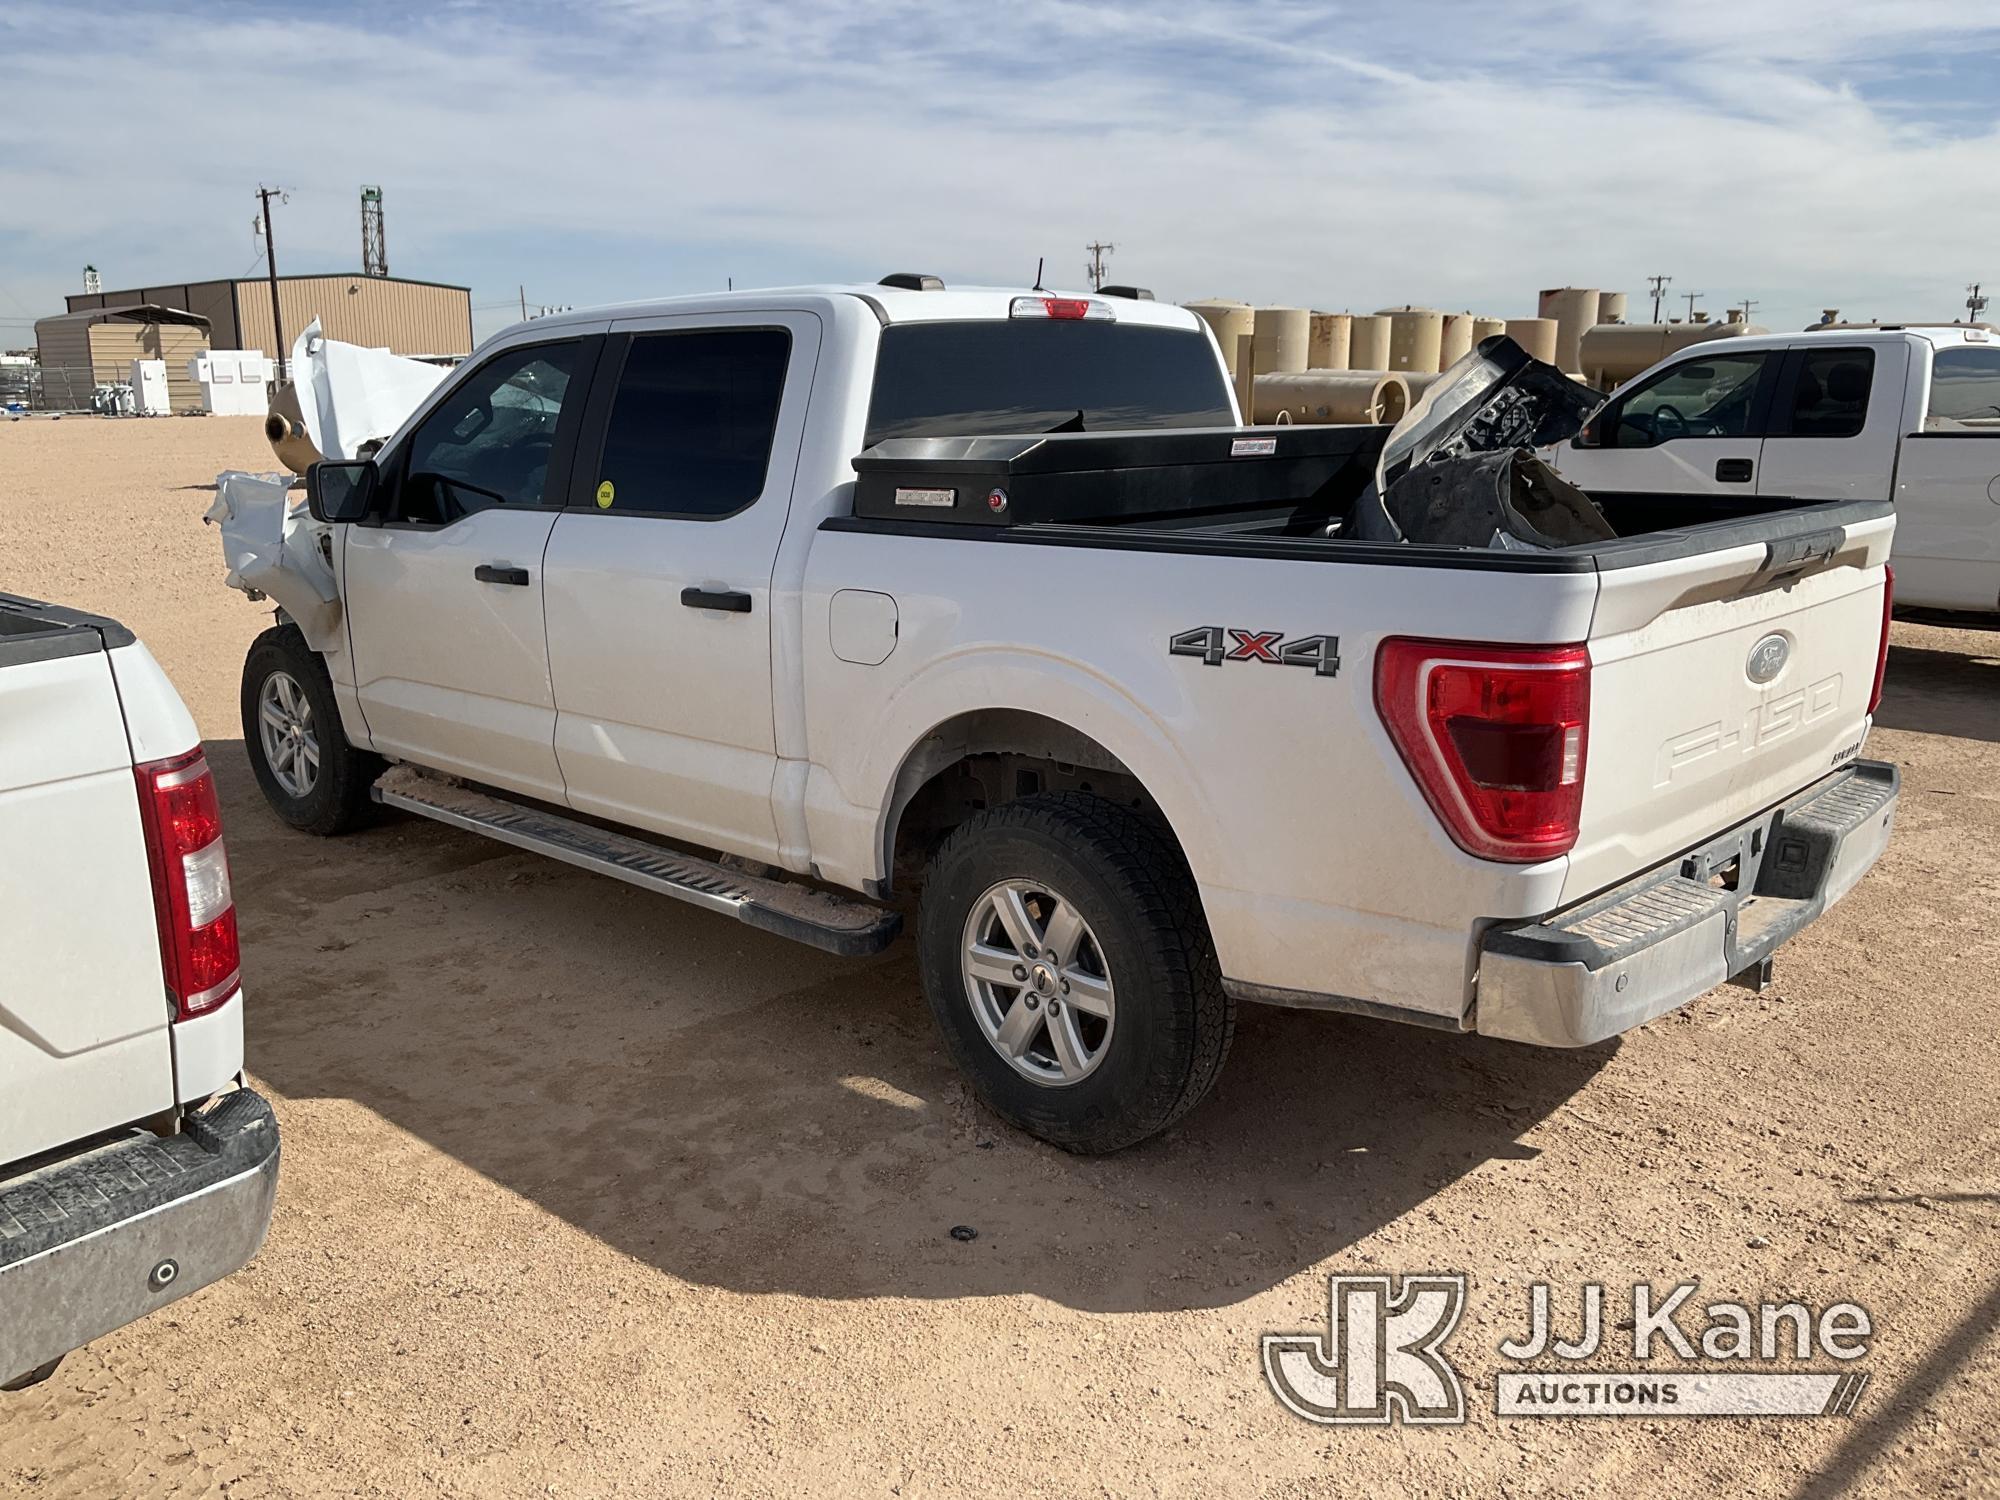 (Midland, TX) 2021 Ford F150 4x4 Crew-Cab Pickup Truck DEALER ONLY! NO RETAIL BUYERS! Wrecked, Does